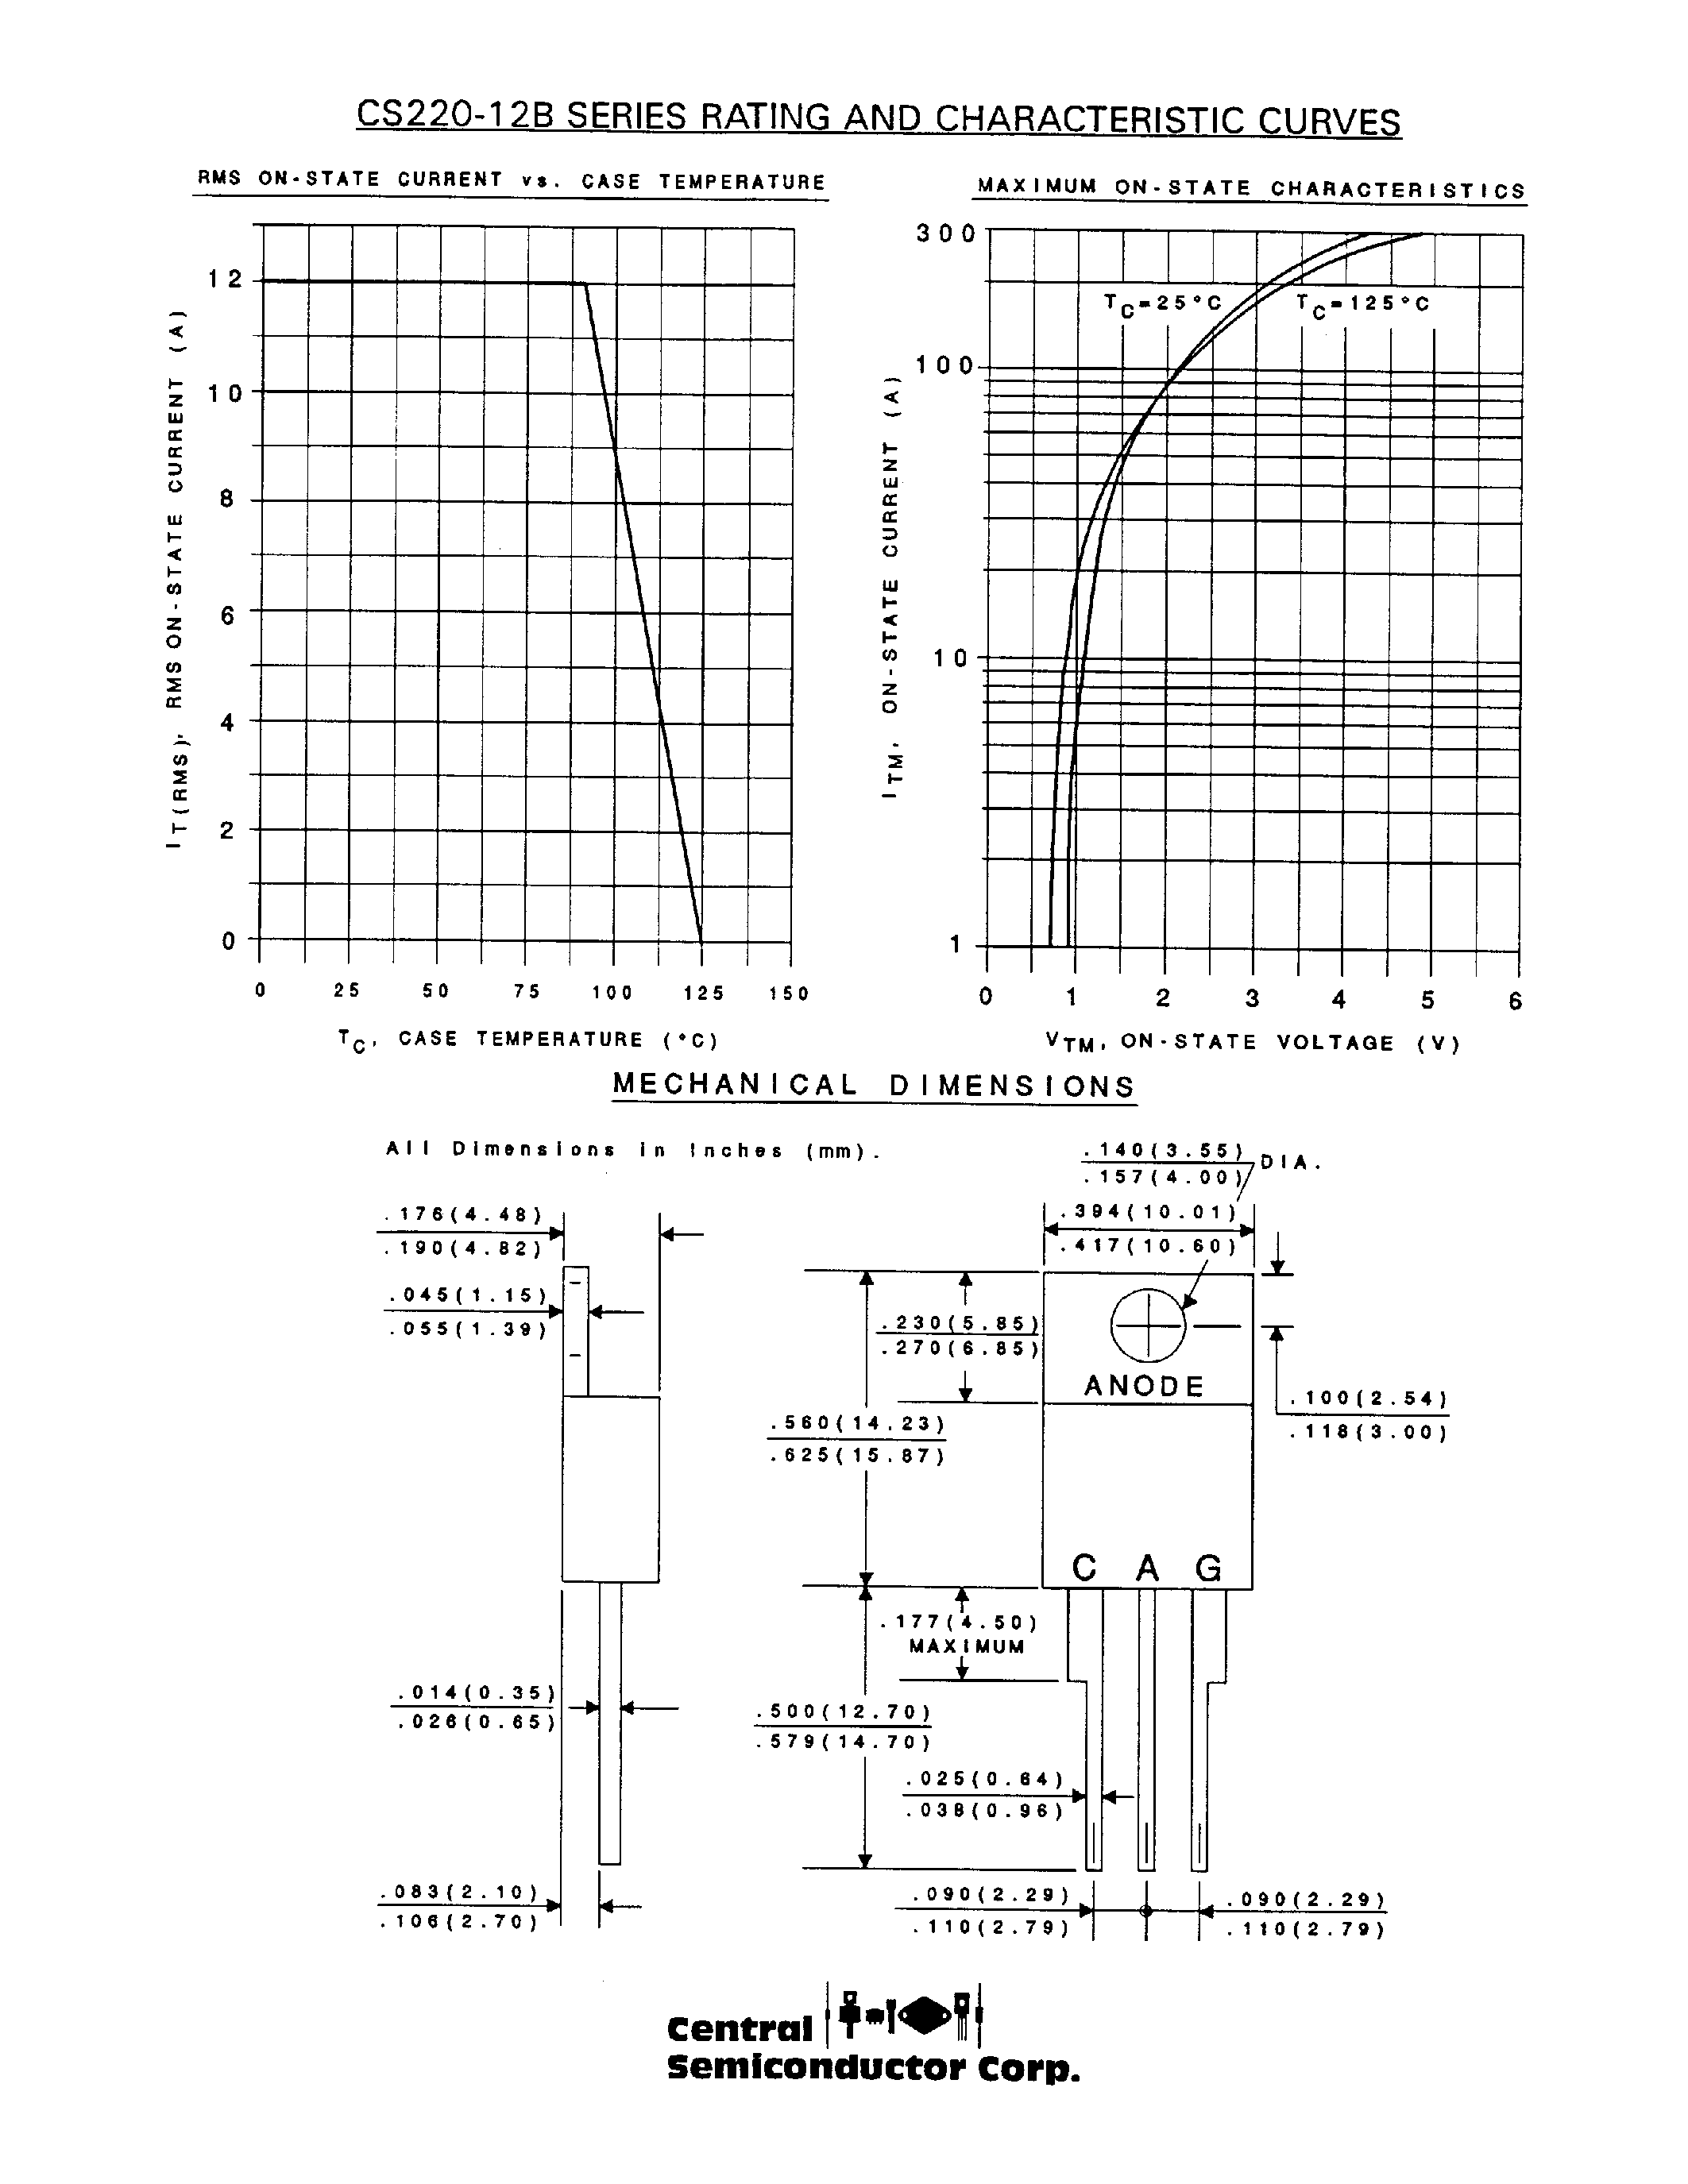 Datasheet CS220-12D - SILICON CONTROLLED RECTIFIER 12 AMP/ 200 THRU 1000 VOLTS page 2